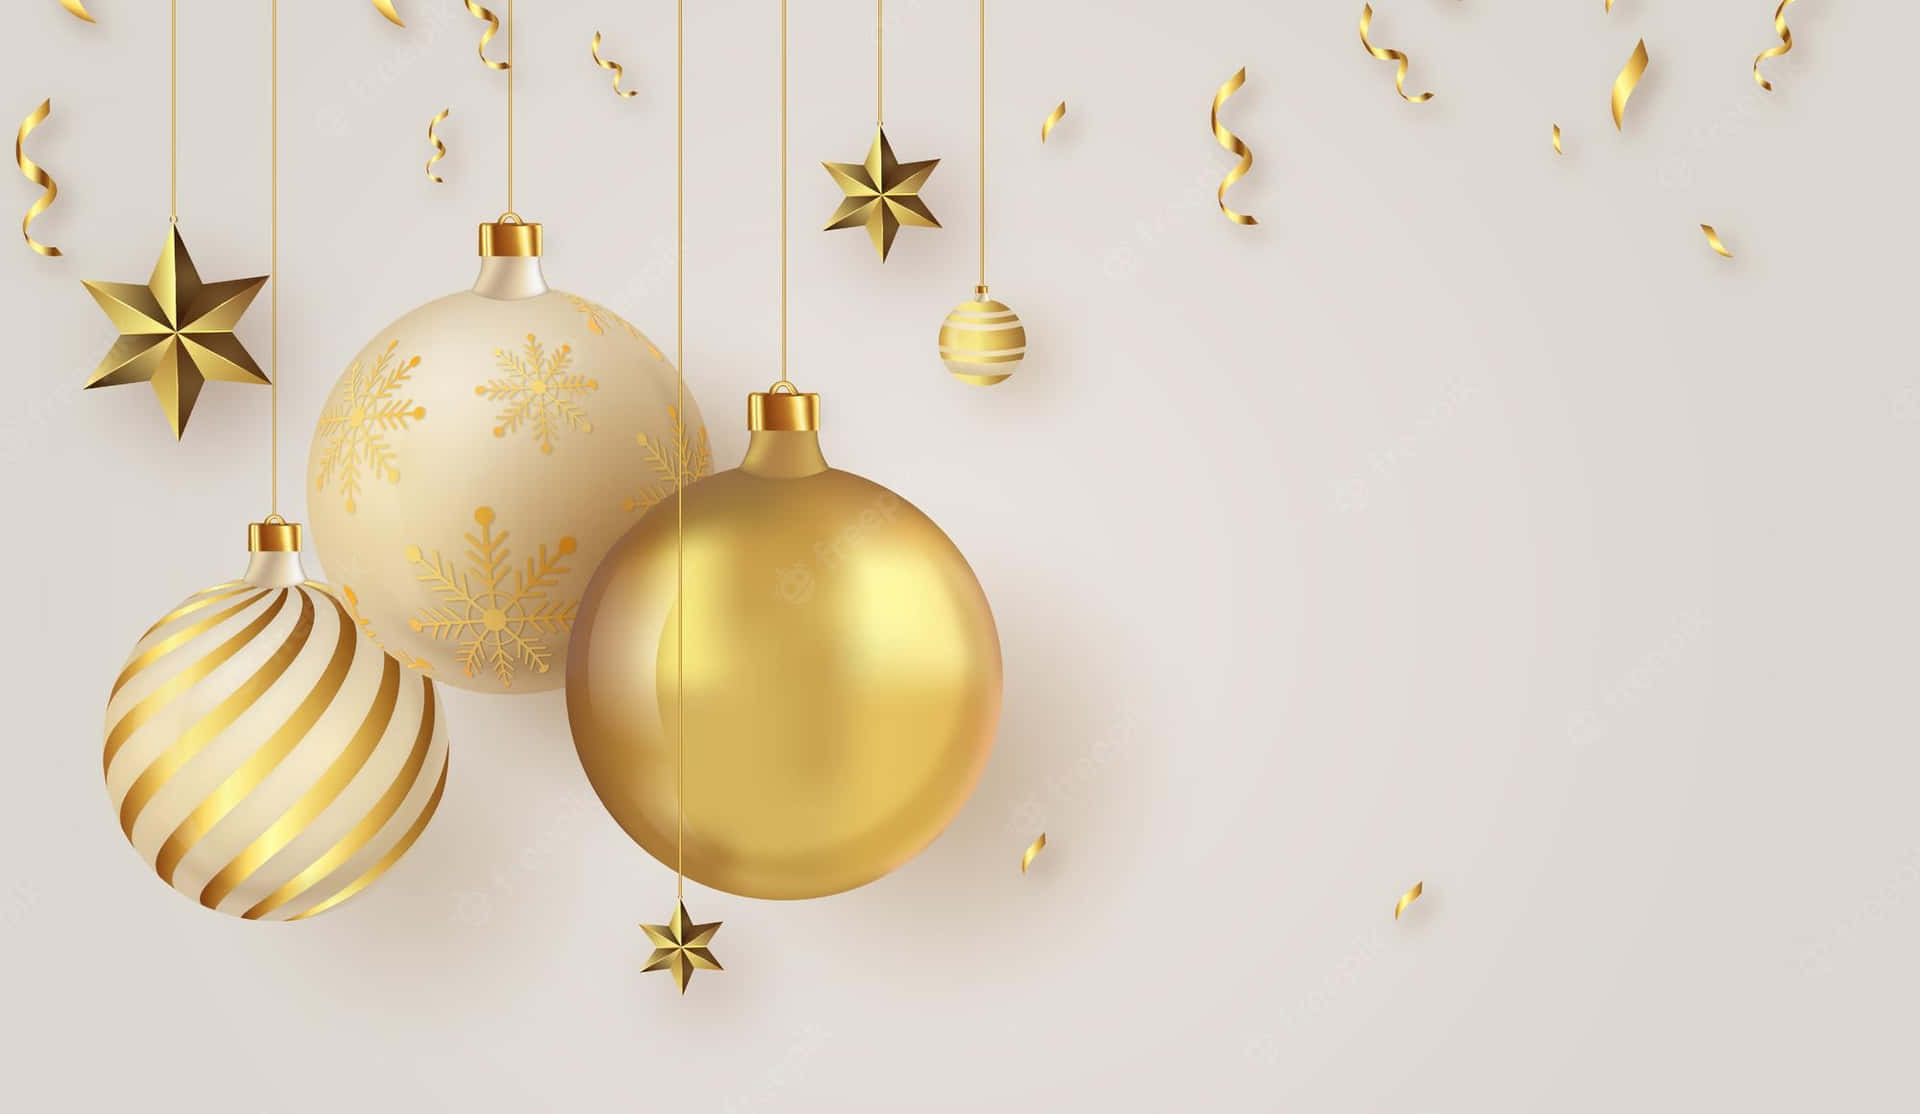 Download Celebrate This Christmas Season With This Golden Theme ...